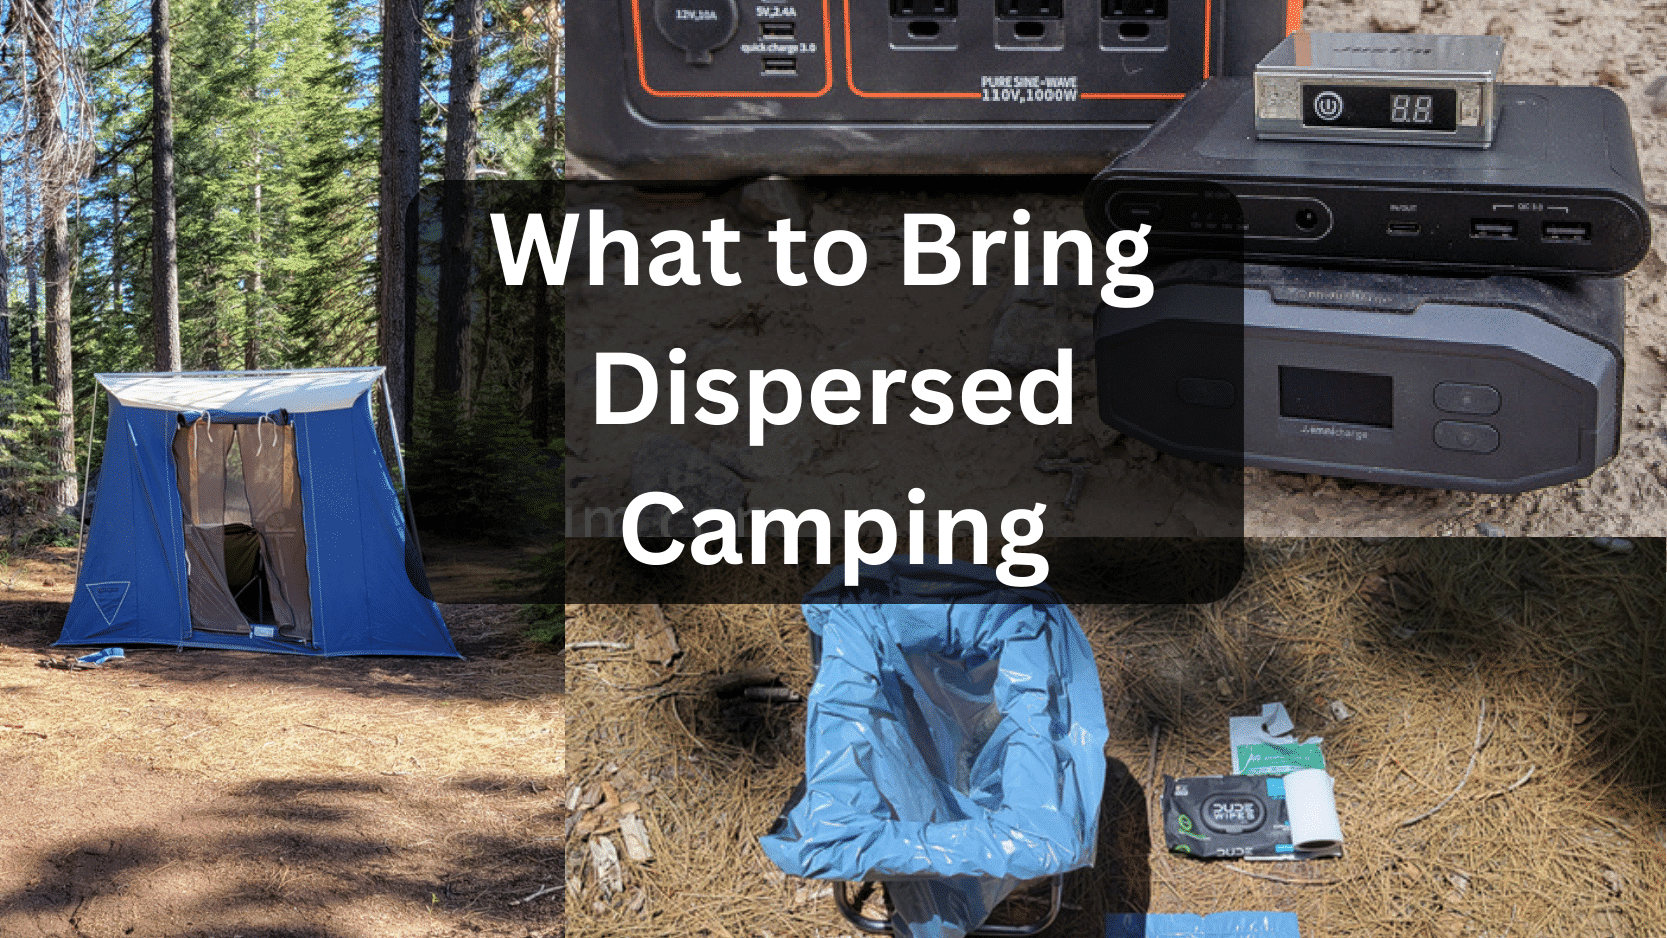 What to Bring for Dispersed Camping: A BLM Gear List